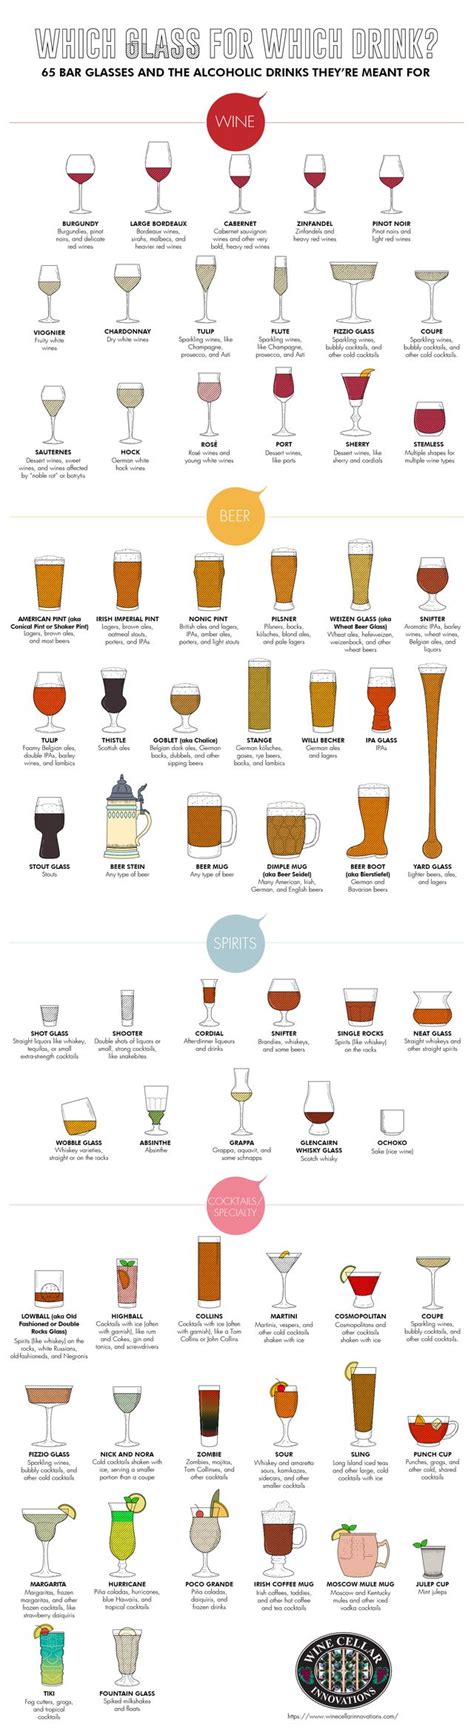 65 Bar Glasses And The Alcoholic Drinks They’re Meant For Cocktails In 2020 Alcoholic Drinks